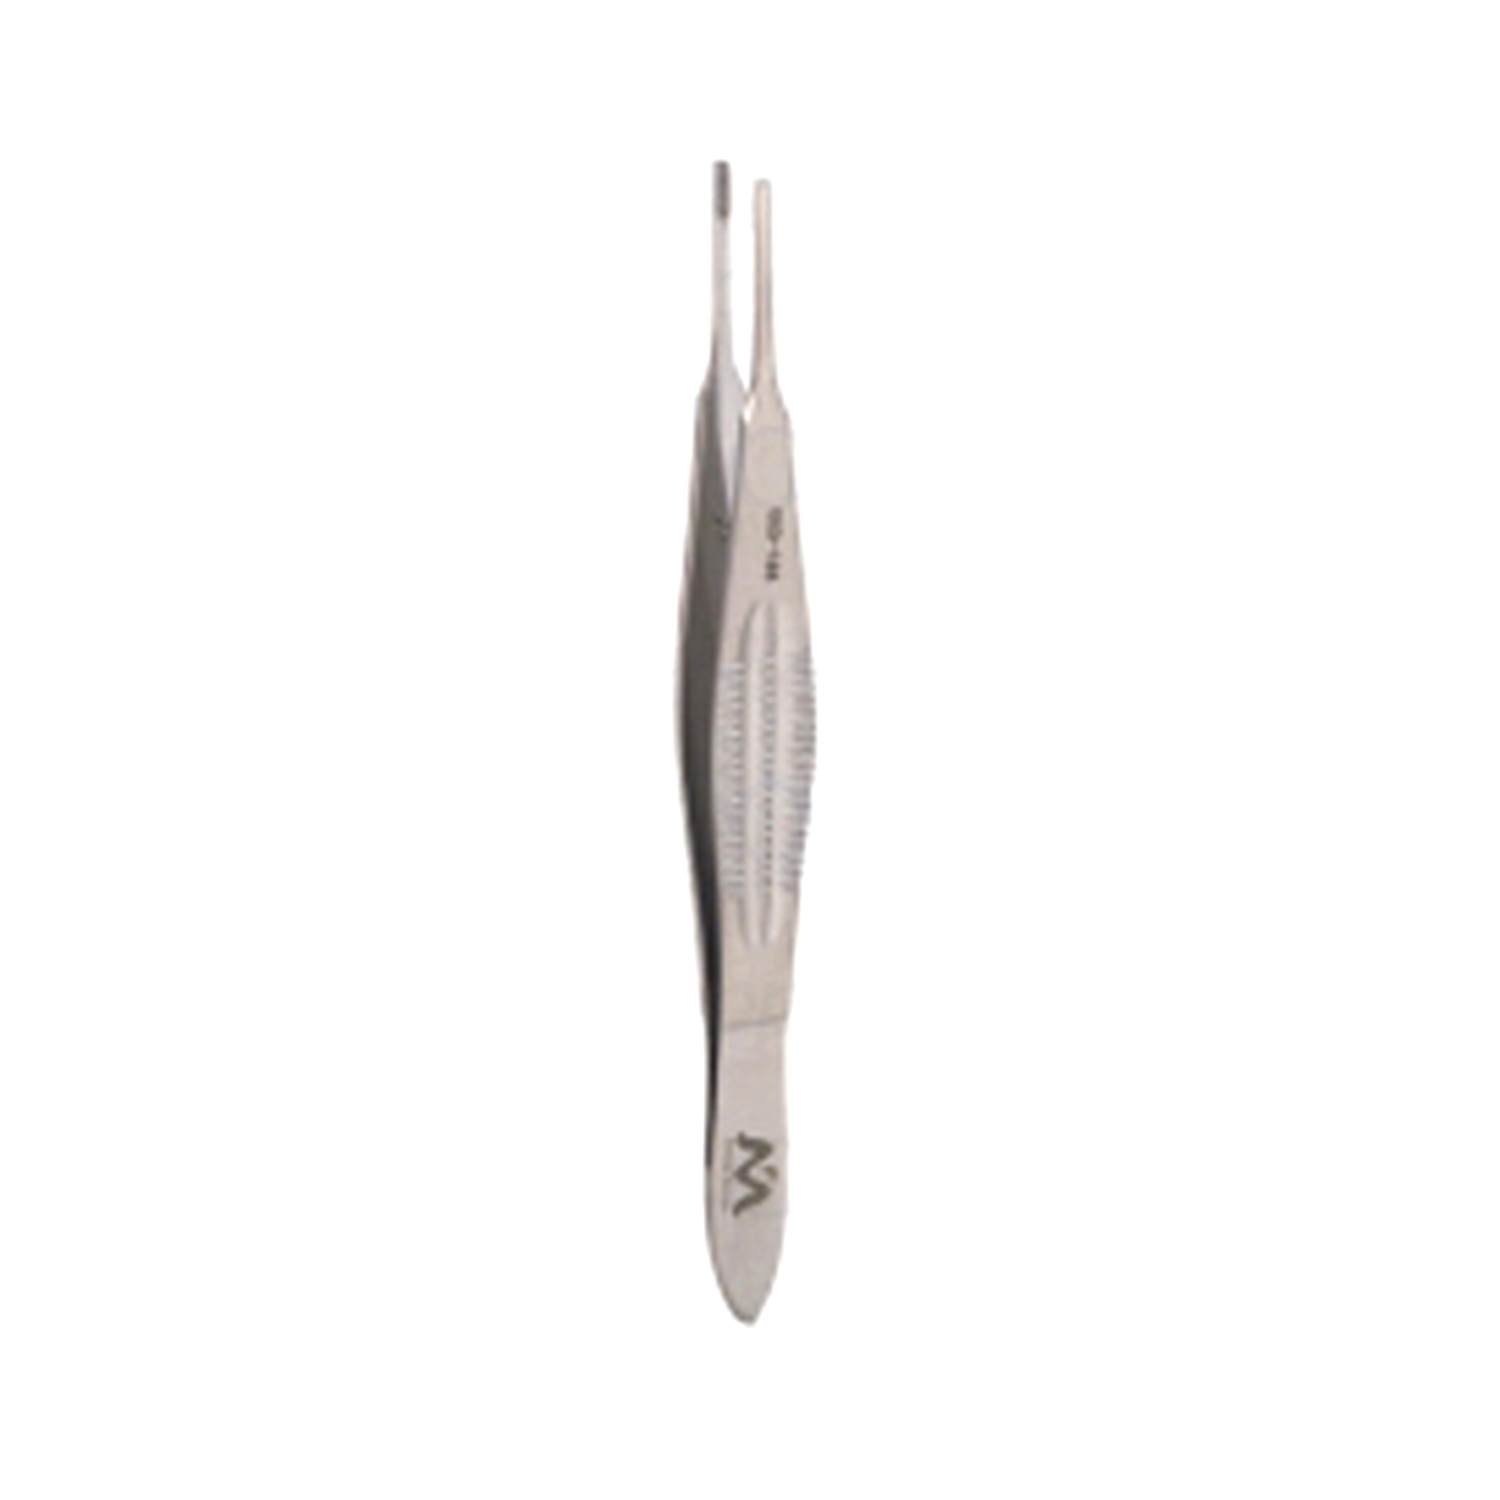 Marina Medical Griffith Brown Forceps, Delicate 9x9 Brown-Adson Teeth, Castro. Body: 11.5cm/4.75in